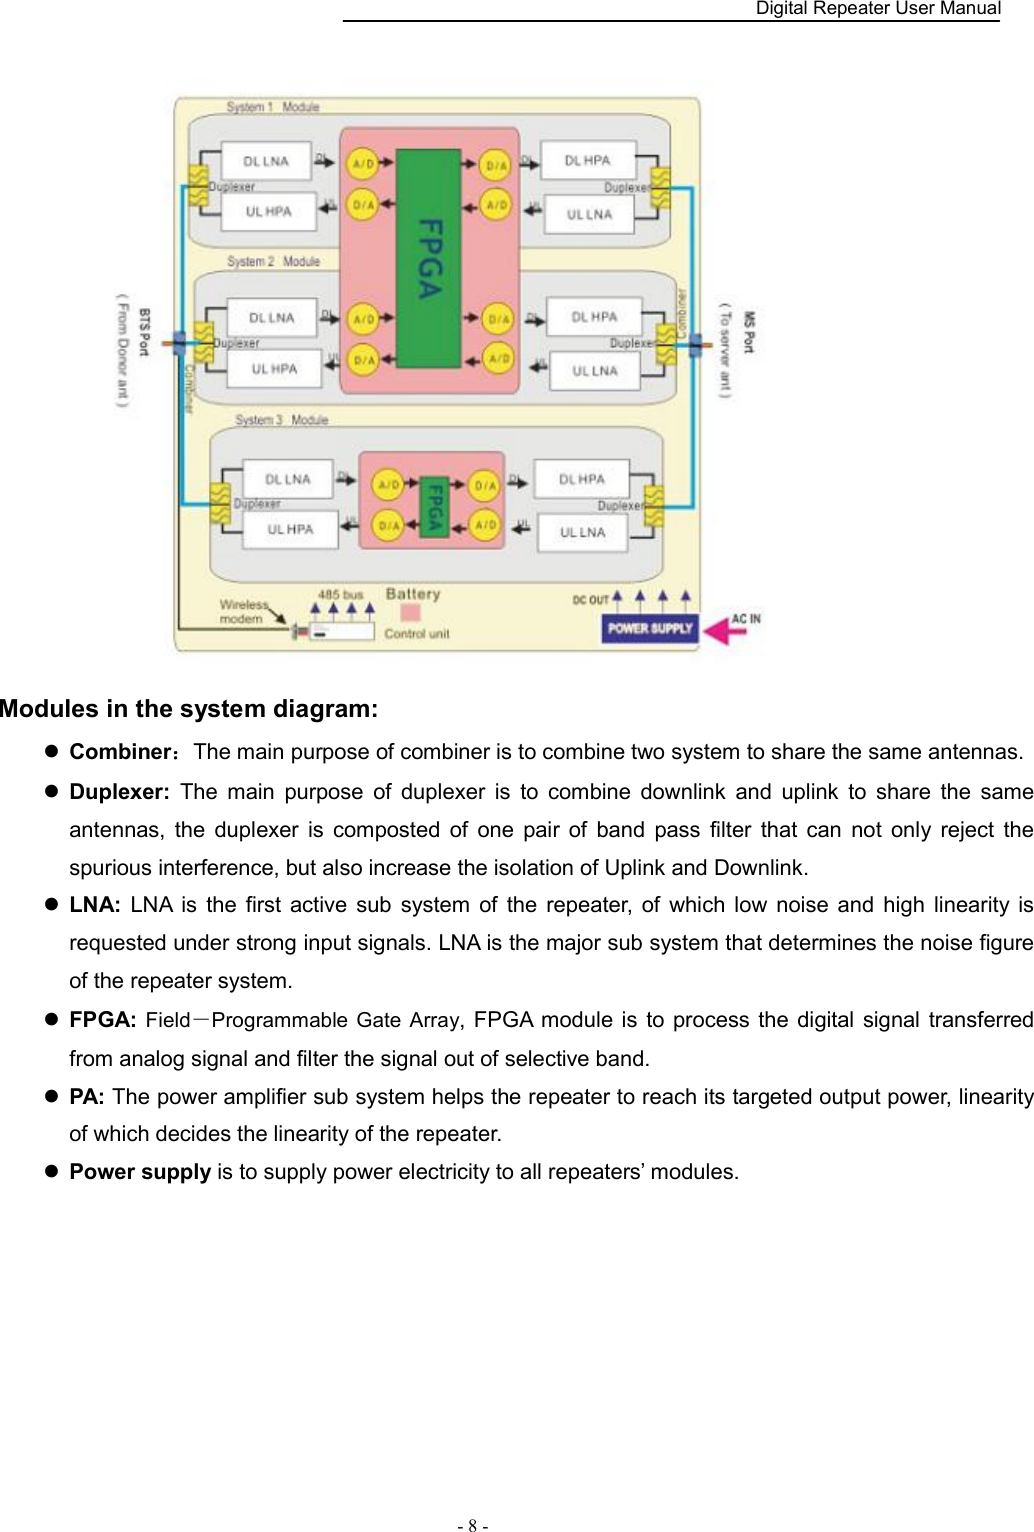    Digital Repeater User Manual  - 8 -    Modules in the system diagram:  Combiner：The main purpose of combiner is to combine two system to share the same antennas.    Duplexer:  The  main  purpose  of  duplexer  is  to  combine  downlink  and  uplink  to  share  the  same antennas,  the  duplexer  is  composted  of  one  pair  of  band  pass  filter  that  can  not  only  reject  the spurious interference, but also increase the isolation of Uplink and Downlink.  LNA:  LNA  is  the  first  active  sub  system  of  the  repeater,  of  which  low  noise  and  high  linearity  is requested under strong input signals. LNA is the major sub system that determines the noise figure of the repeater system.  FPGA: Field－Programmable Gate Array, FPGA  module is to process the digital signal transferred from analog signal and filter the signal out of selective band.    PA: The power amplifier sub system helps the repeater to reach its targeted output power, linearity of which decides the linearity of the repeater.  Power supply is to supply power electricity to all repeaters’ modules. 